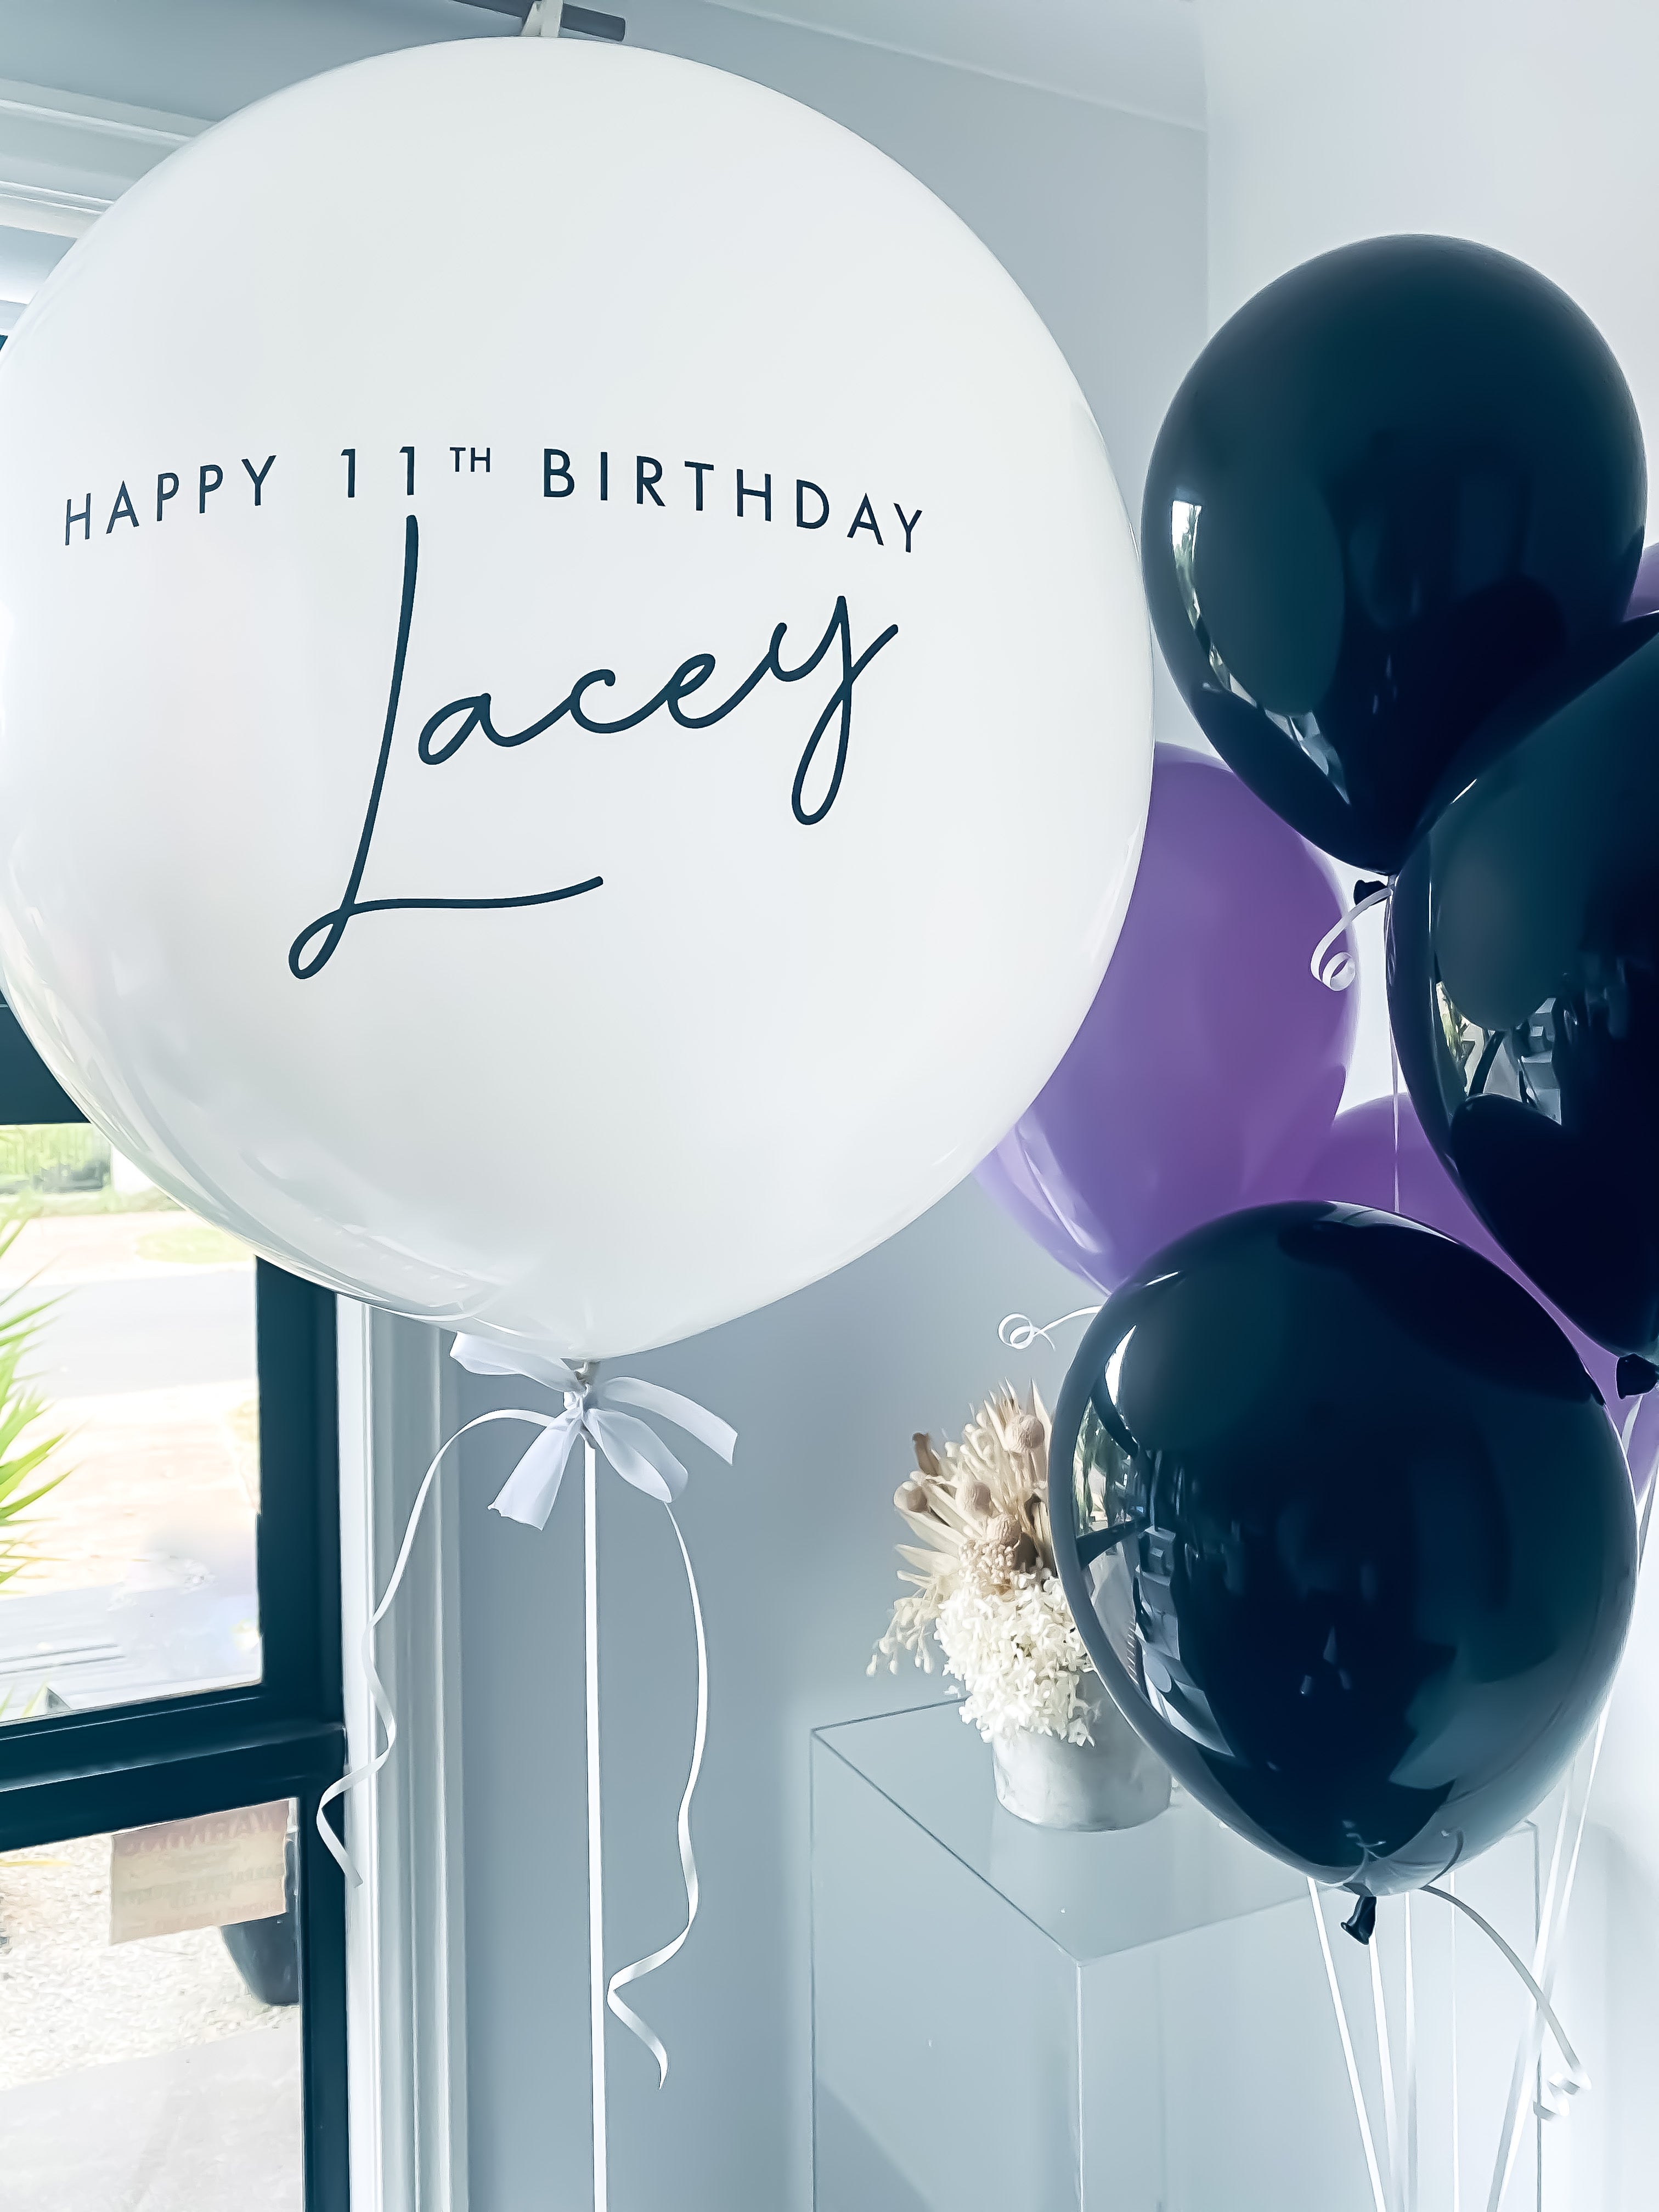 CREATE YOUR OWN PERSONALISED BALLOON BUNCH